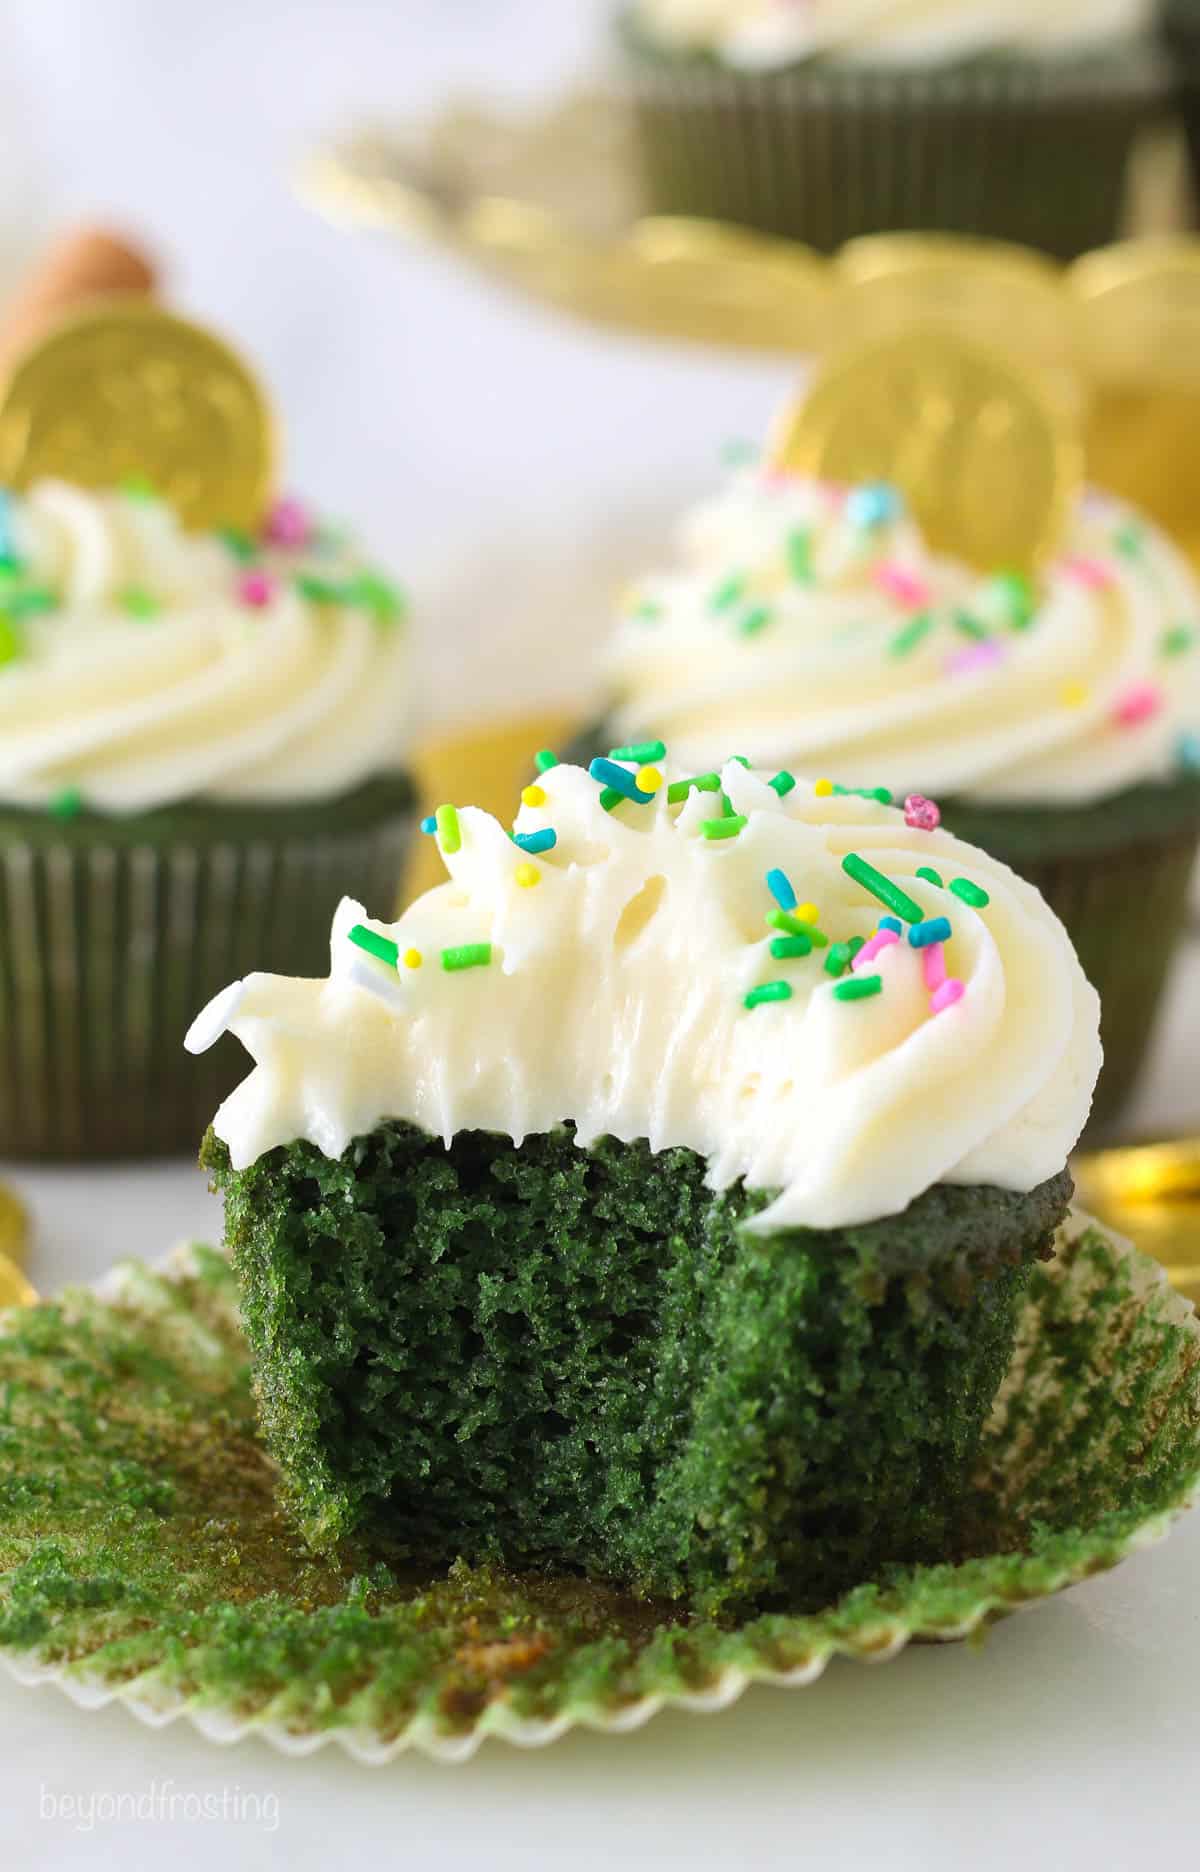 A frosted green velvet cupcake with a bite taken from it